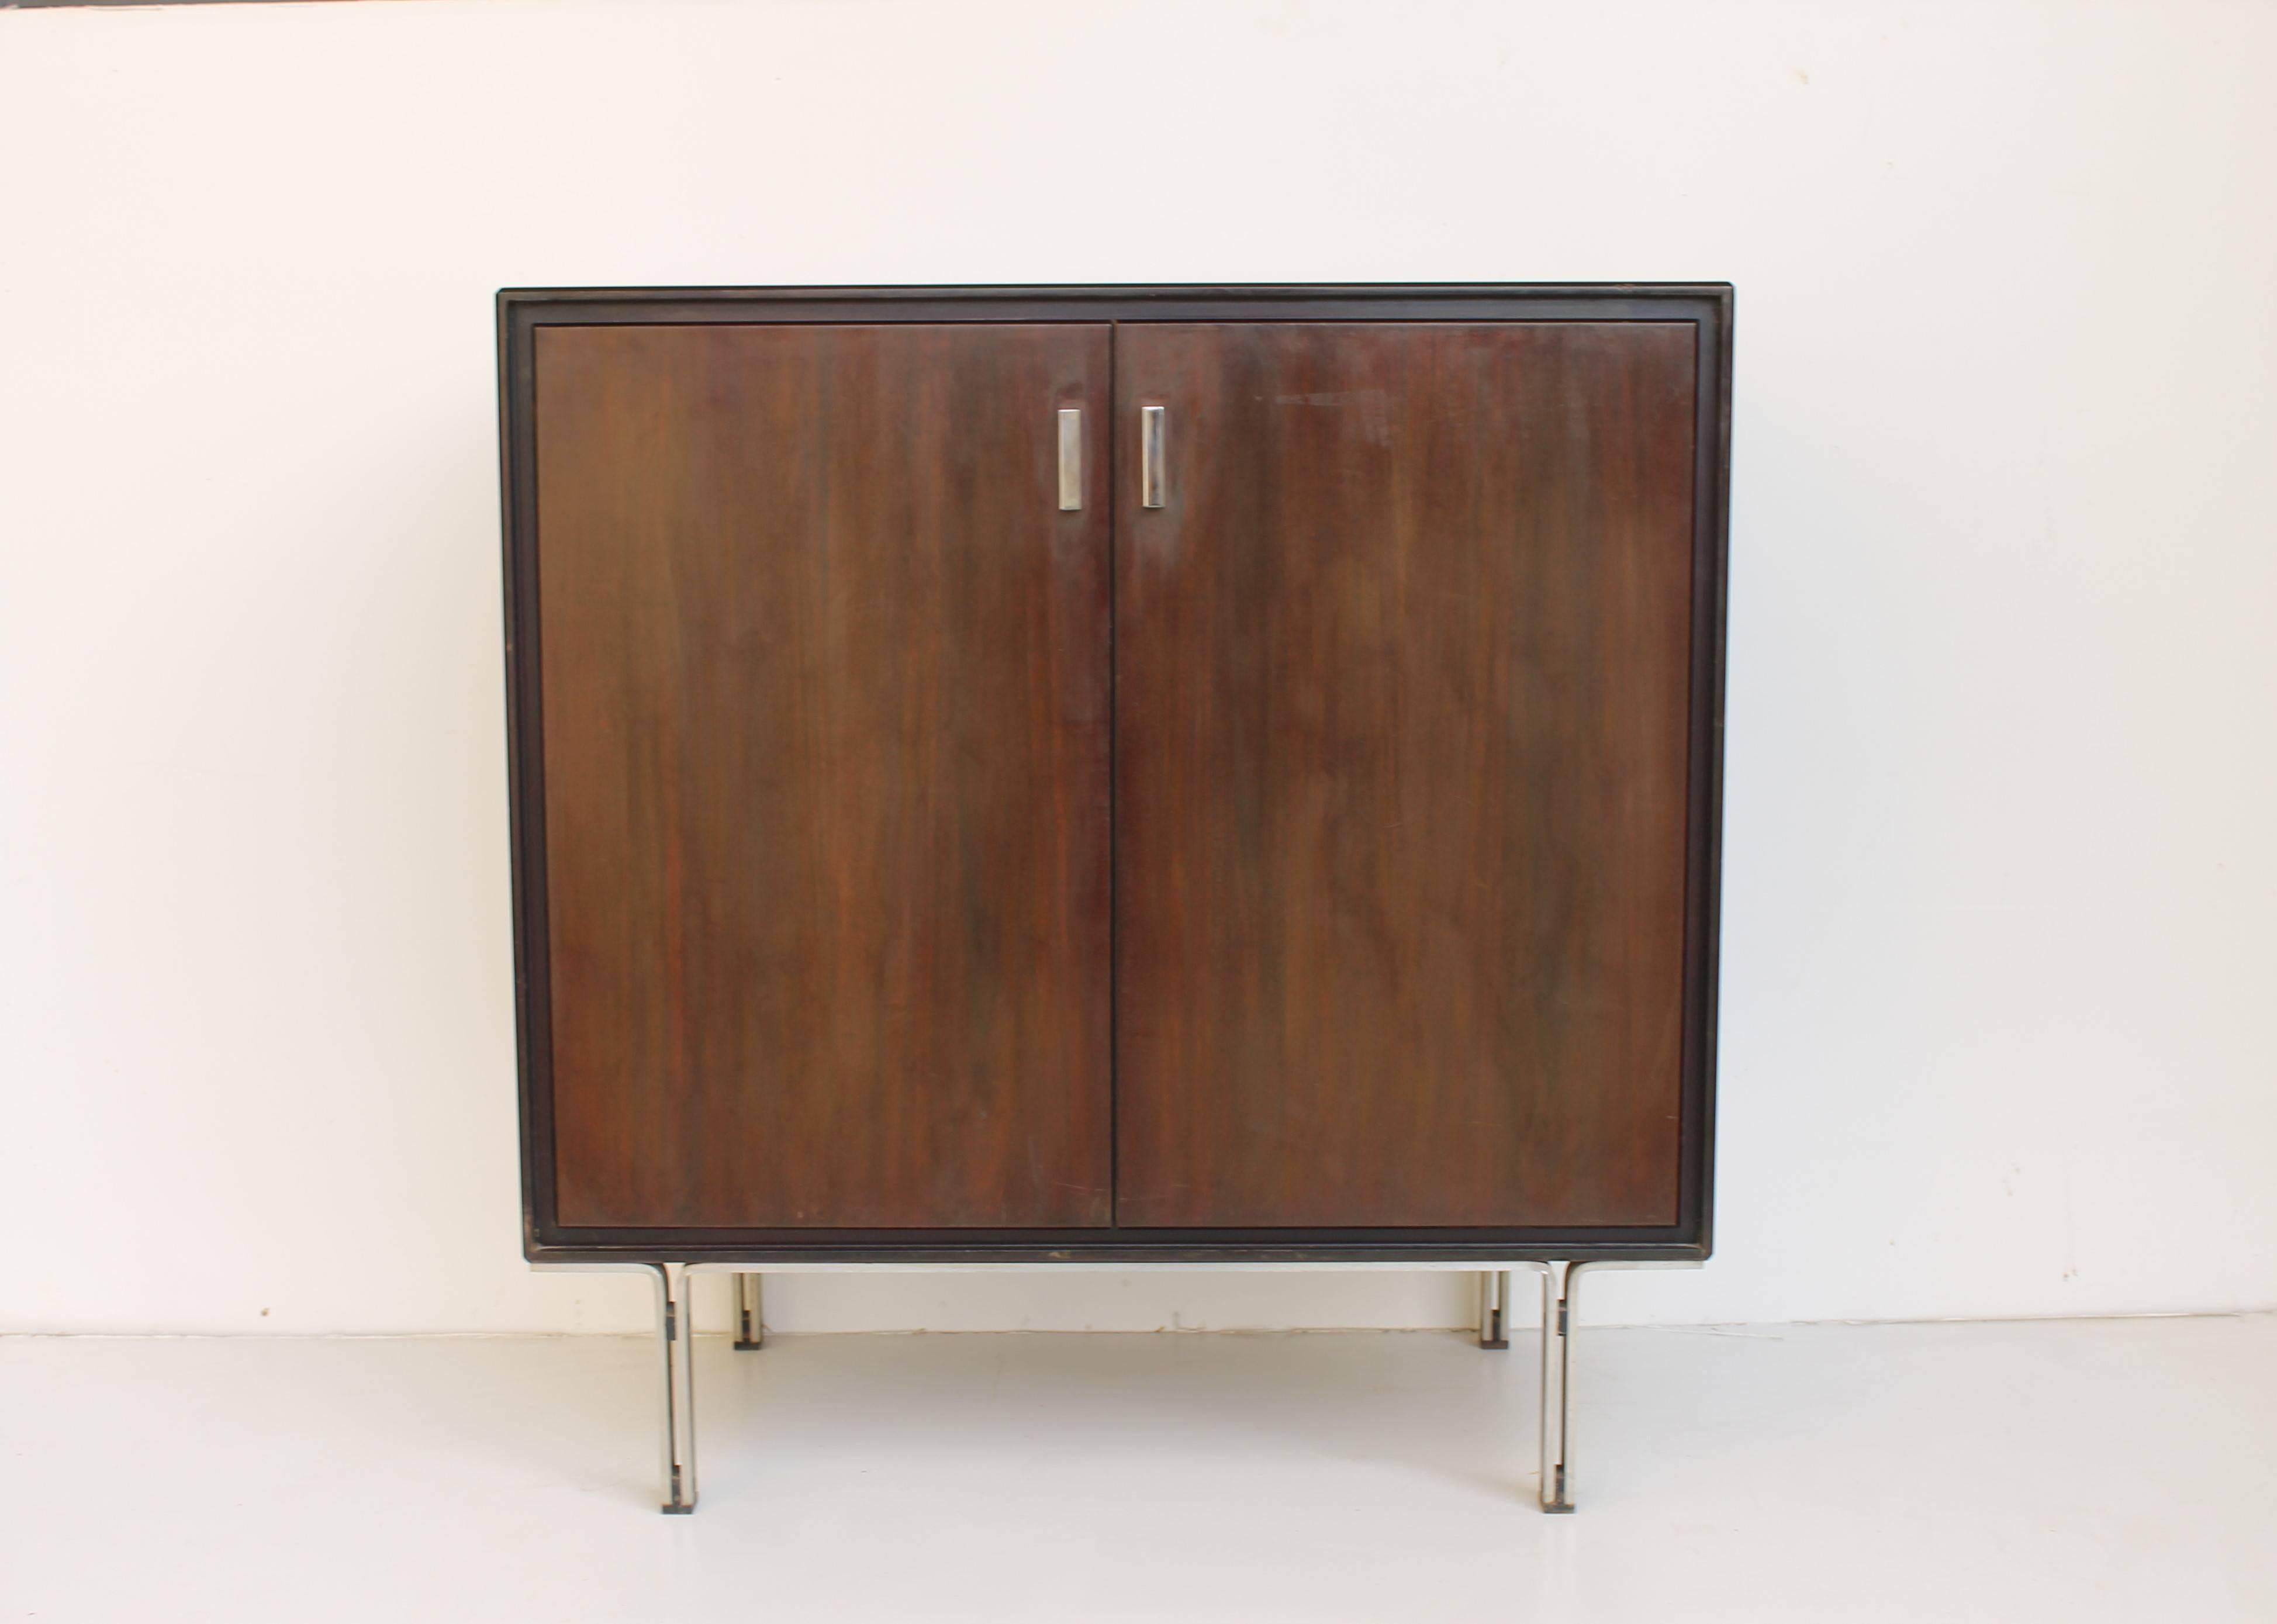 Two Formanova cabinets designed by Gianni Moscatelli for Formanova, circa 1965. 

Veneered rosewood strucutre and metal chromed legs.